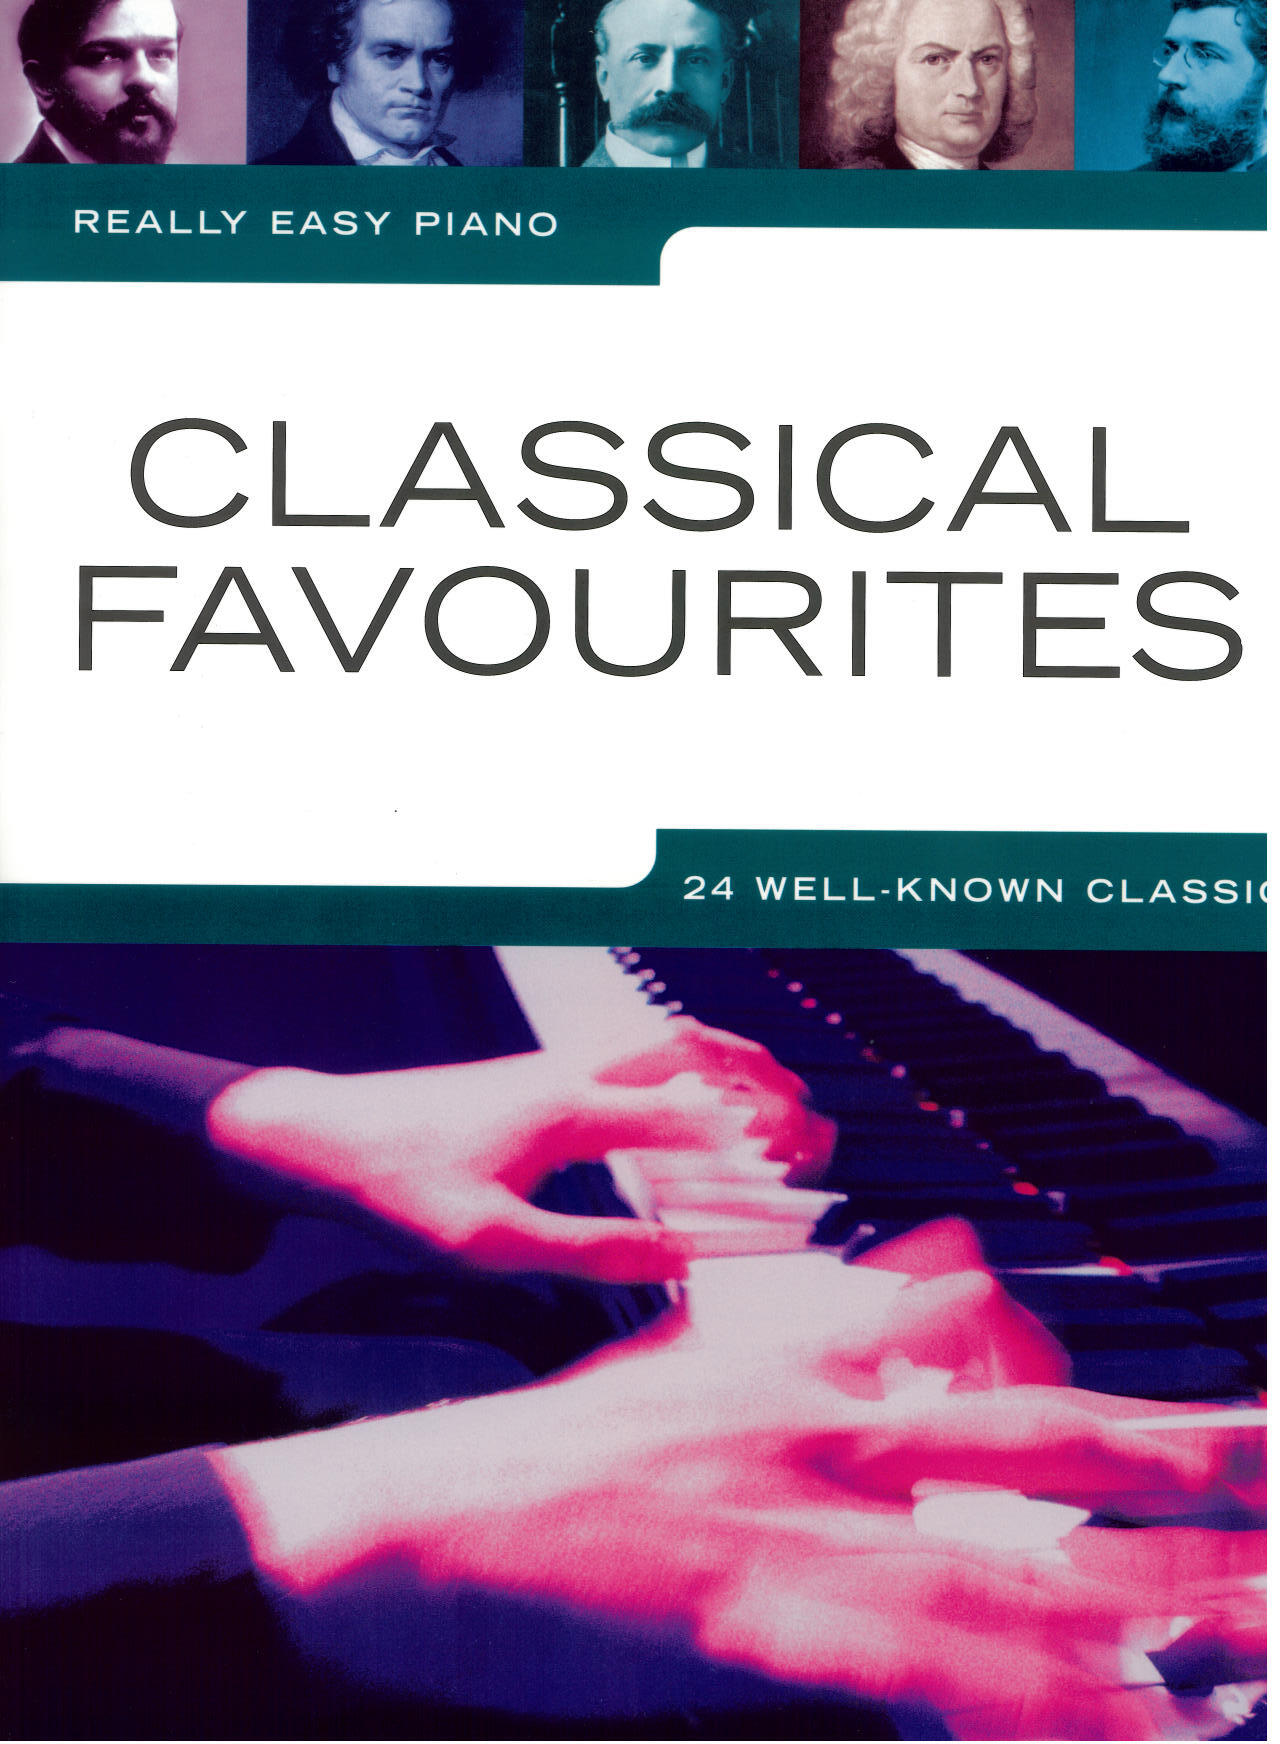 Really Easy Piano: Classical Favourites : photo 1